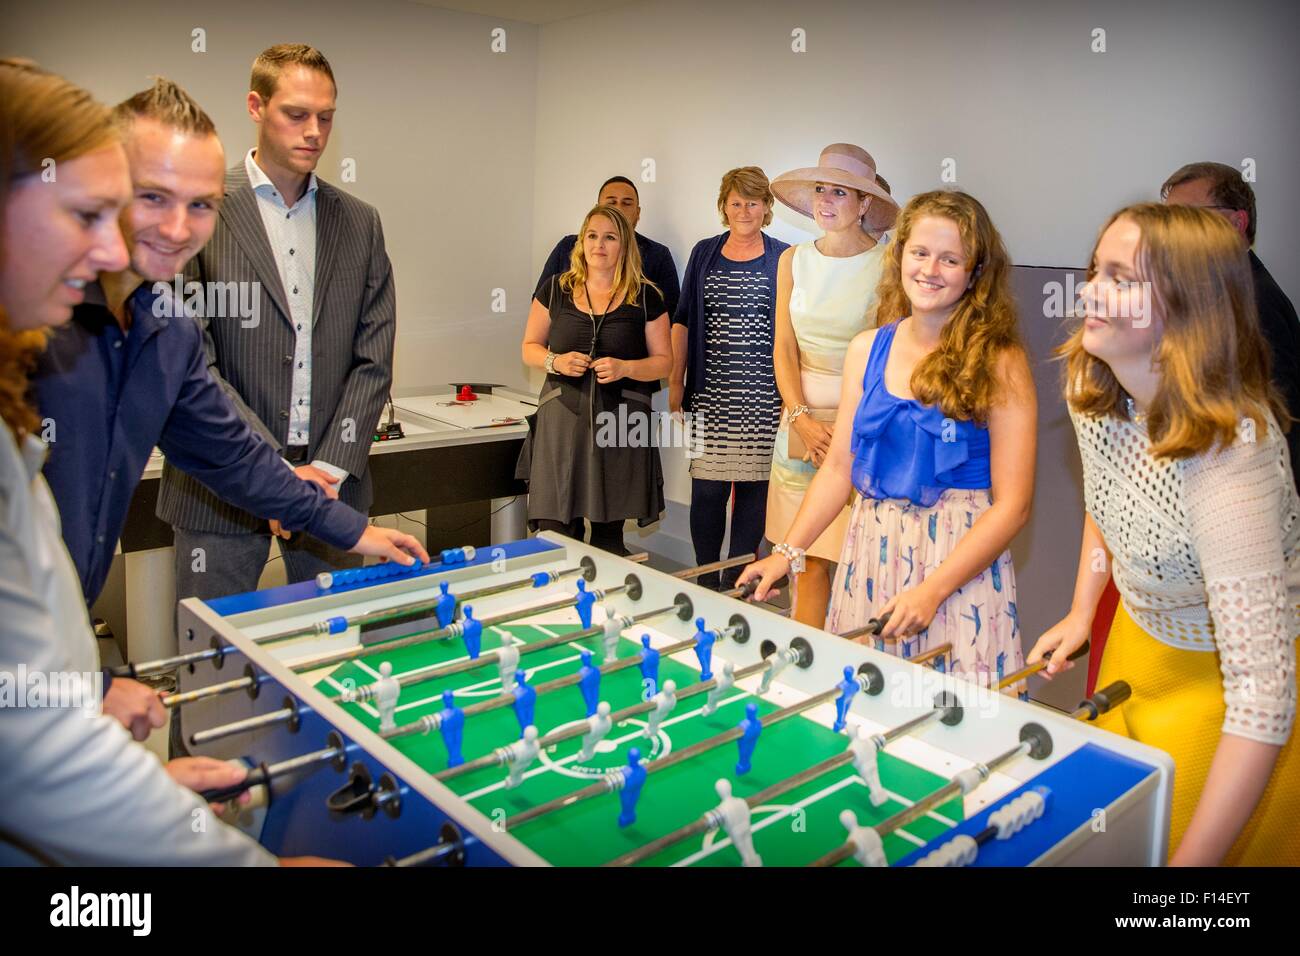 Laren, The Netherlands. 26th Aug, 2015. Queen Maxima of The Netherlands opens the Papageno house in Laren, The Netherlands, 26 August 2015. At the house youth with autism learn to live independently and take part in work experience and offers an restaurant and theater where the youth can work in. Photo: Patrick van Katwijk/ POINT DE VUE OUT - NO WIRE SERVICE-/dpa/Alamy Live News Stock Photo